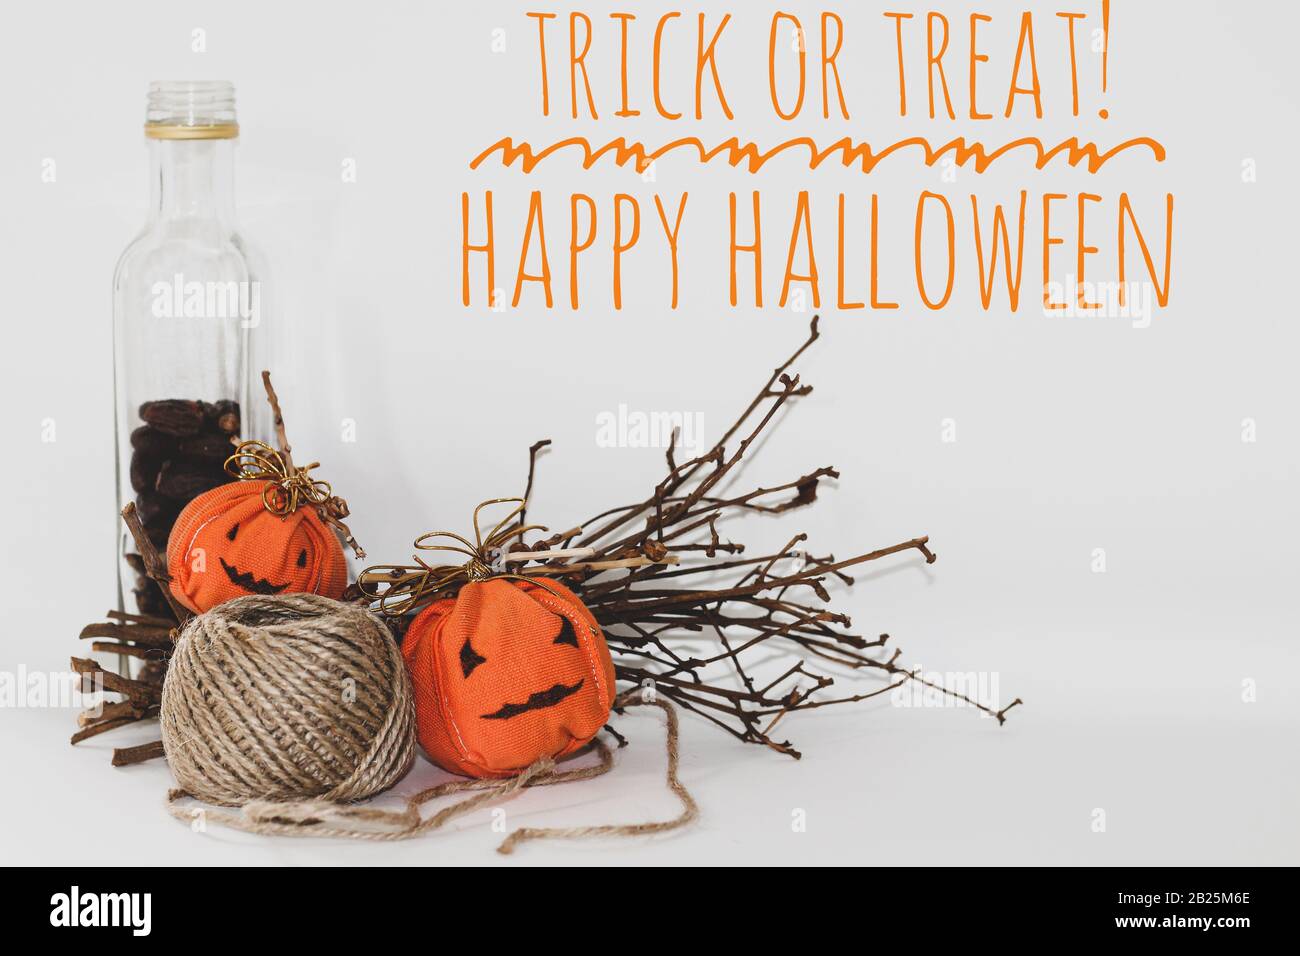 Halloween trick or treat greeting background Stock Photo